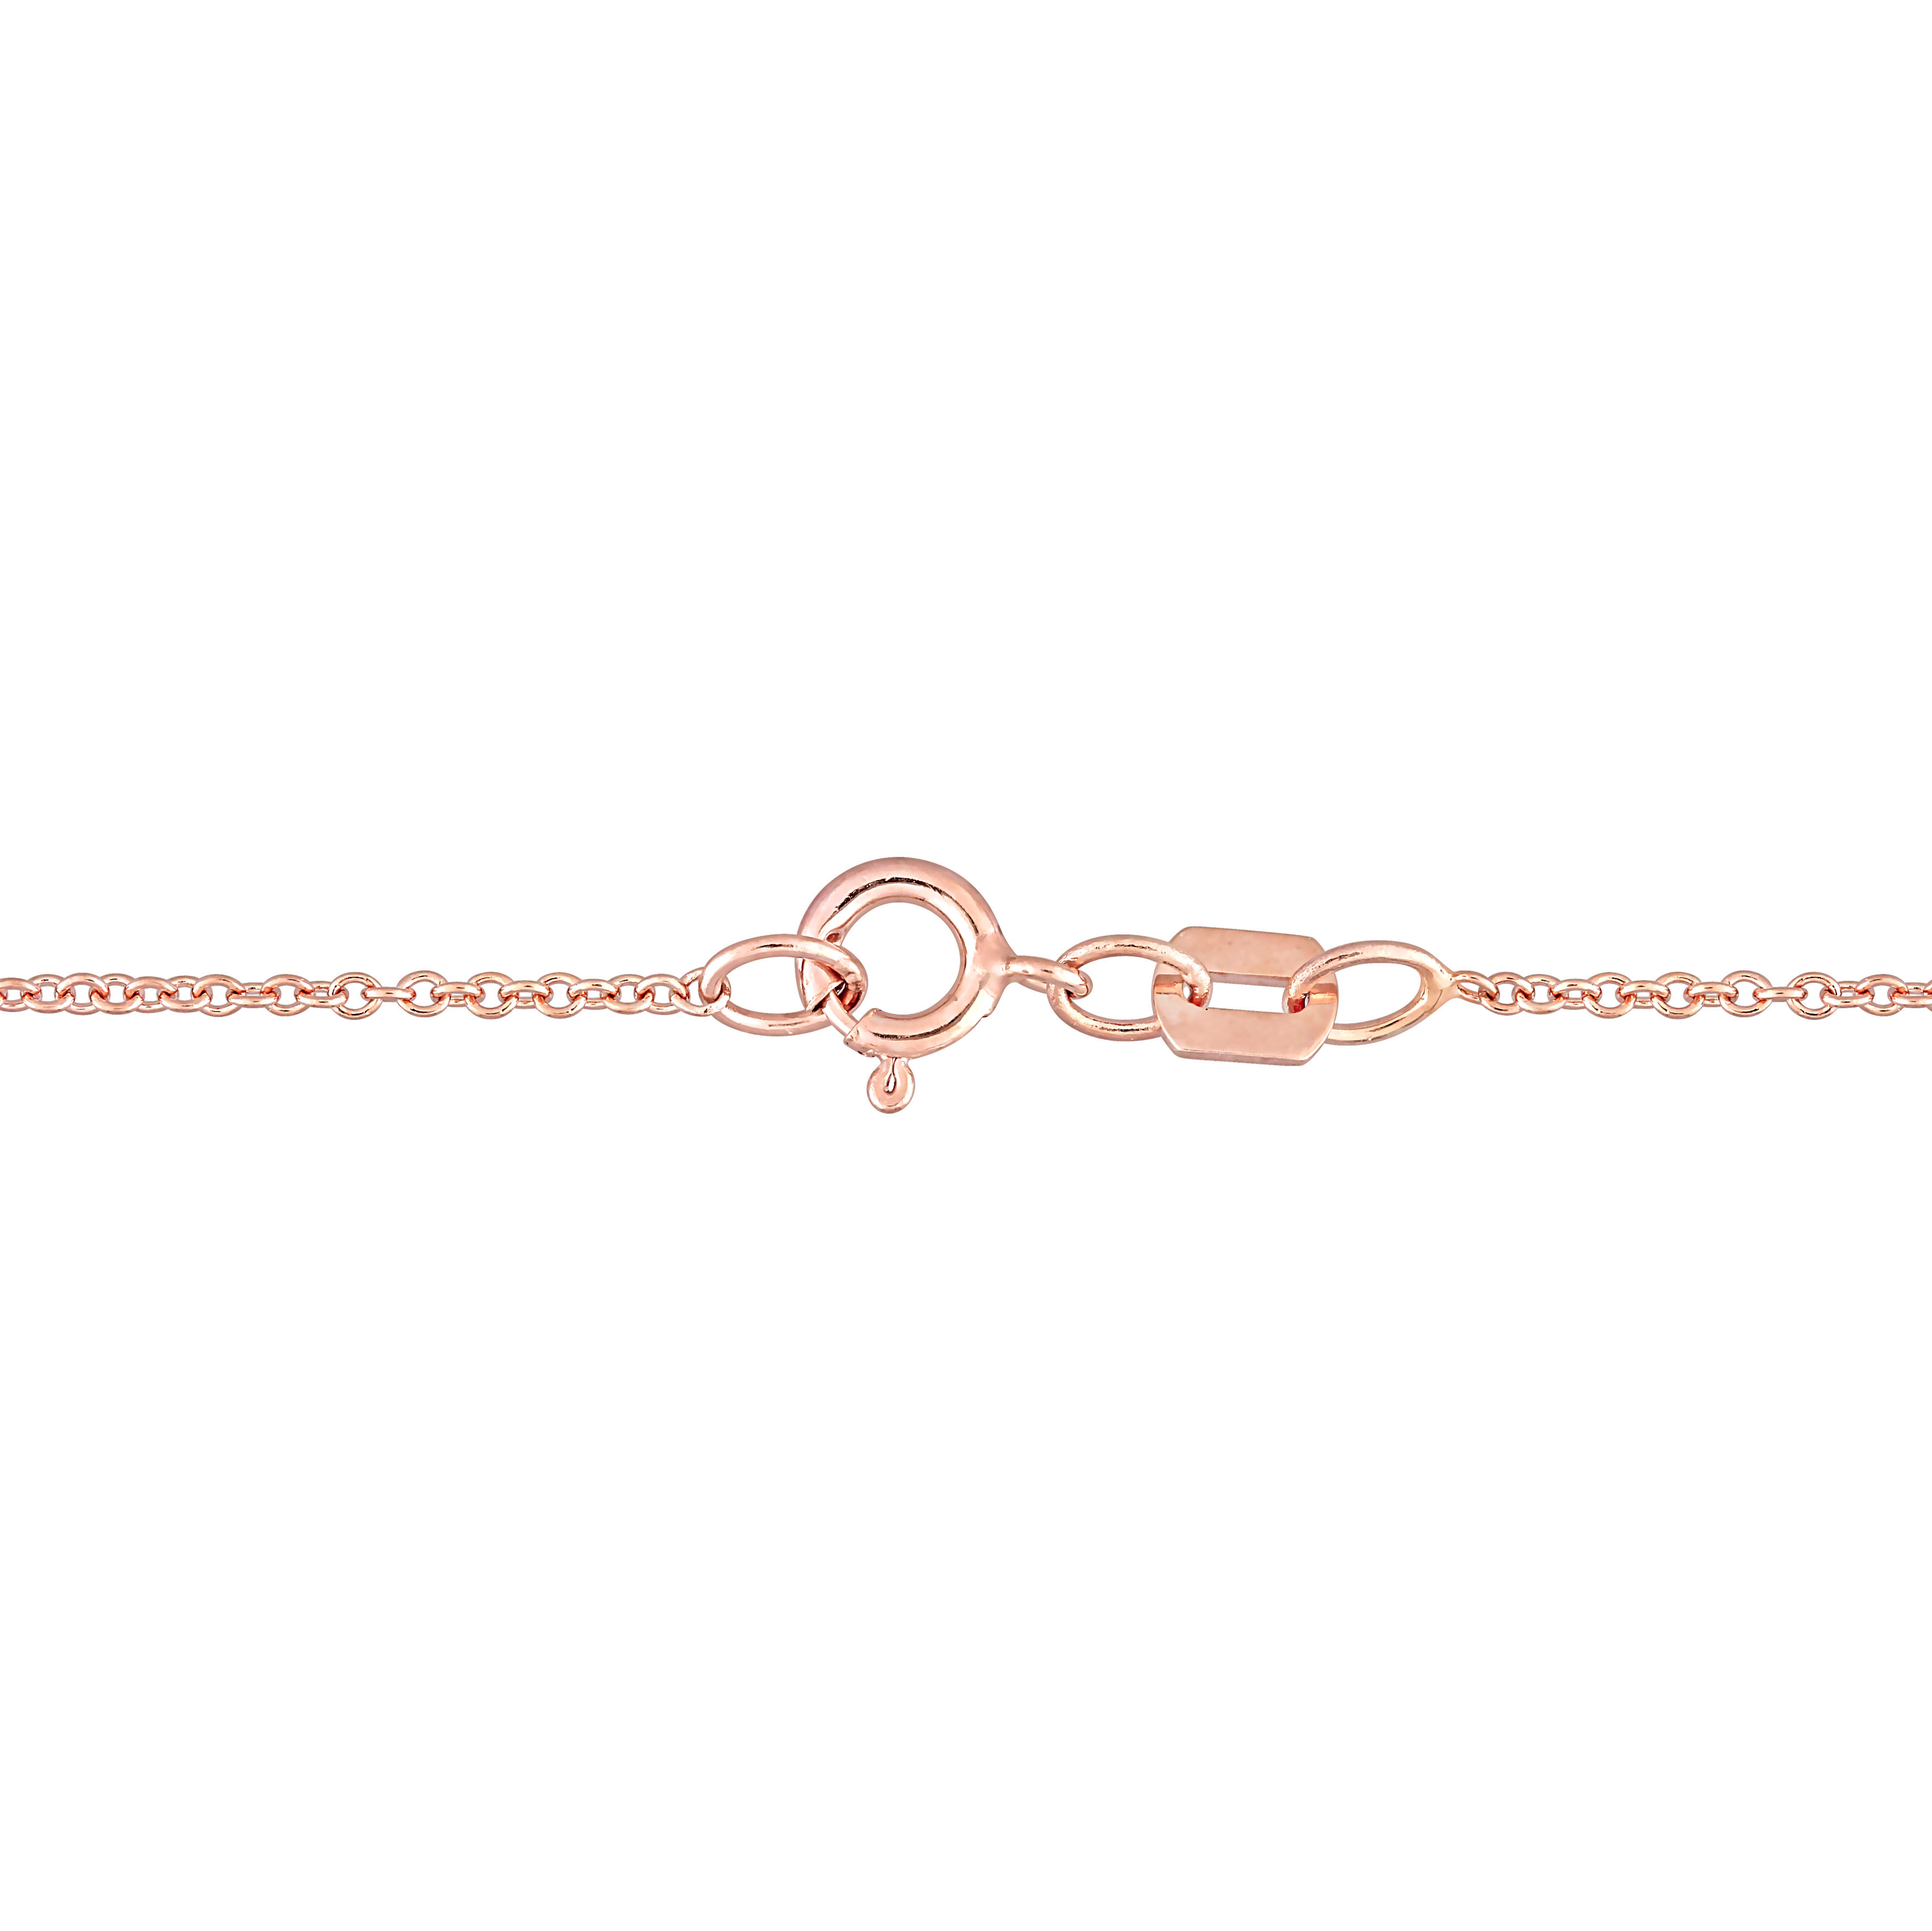 1 1/7 CT TGW Morganite and 1/10 CT Diamond TW Interlaced Halo Necklace in 10k Rose Gold - 17 in.